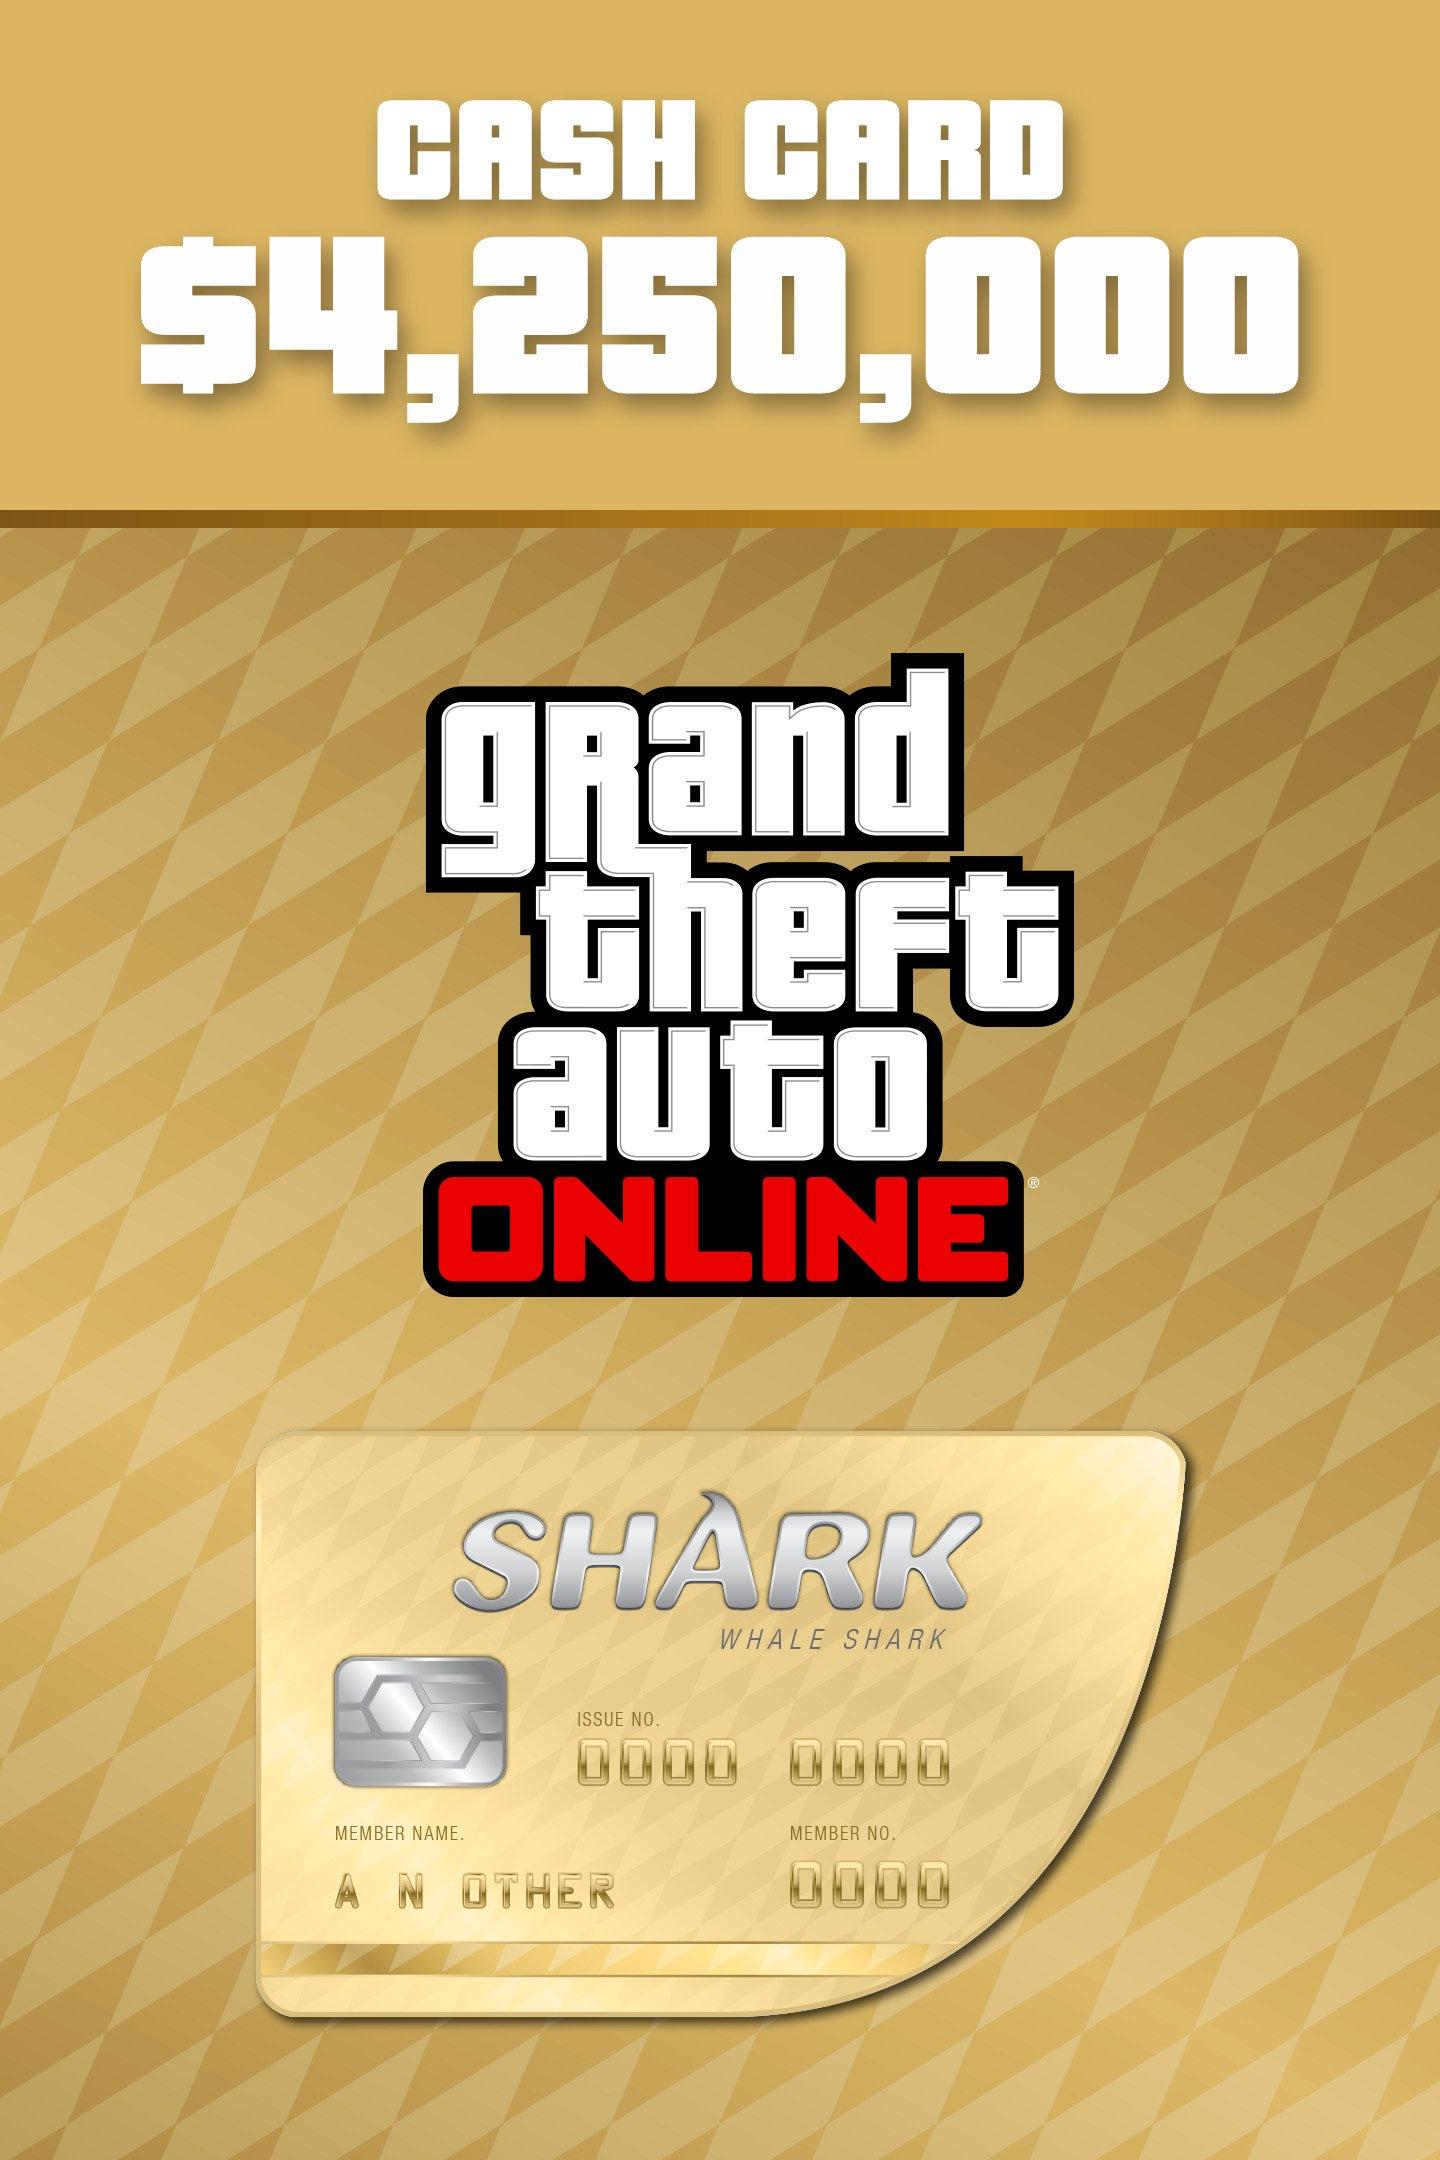 Grand Theft Auto Online: The Whale Shark Cash Card